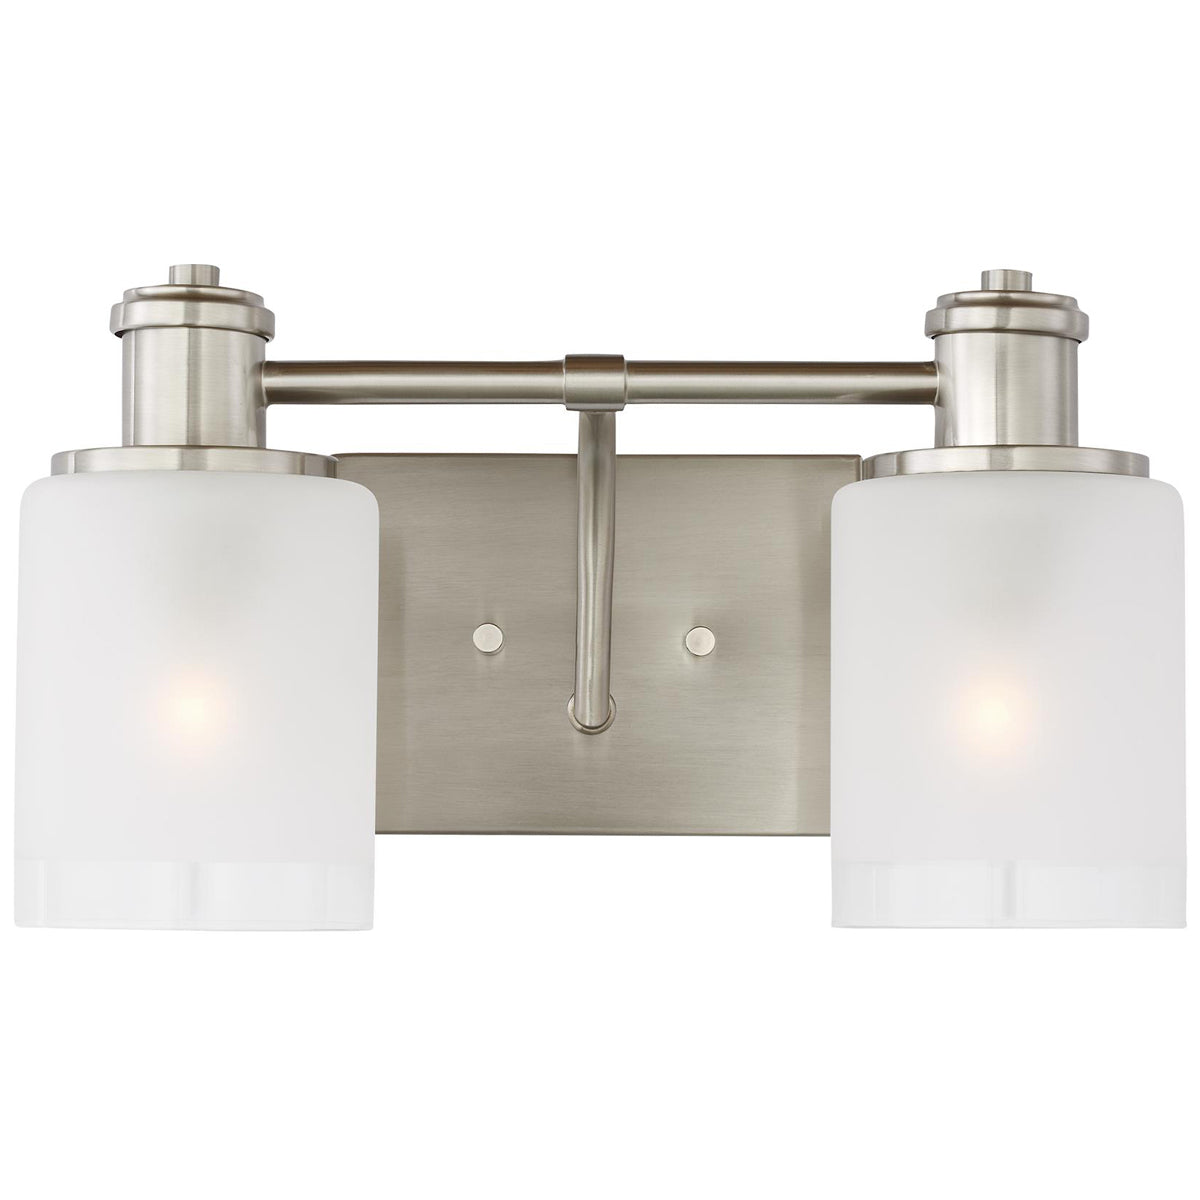 Sea Gull Lighting Norwood 2-Light Wall/Bath Sconce without Bulb